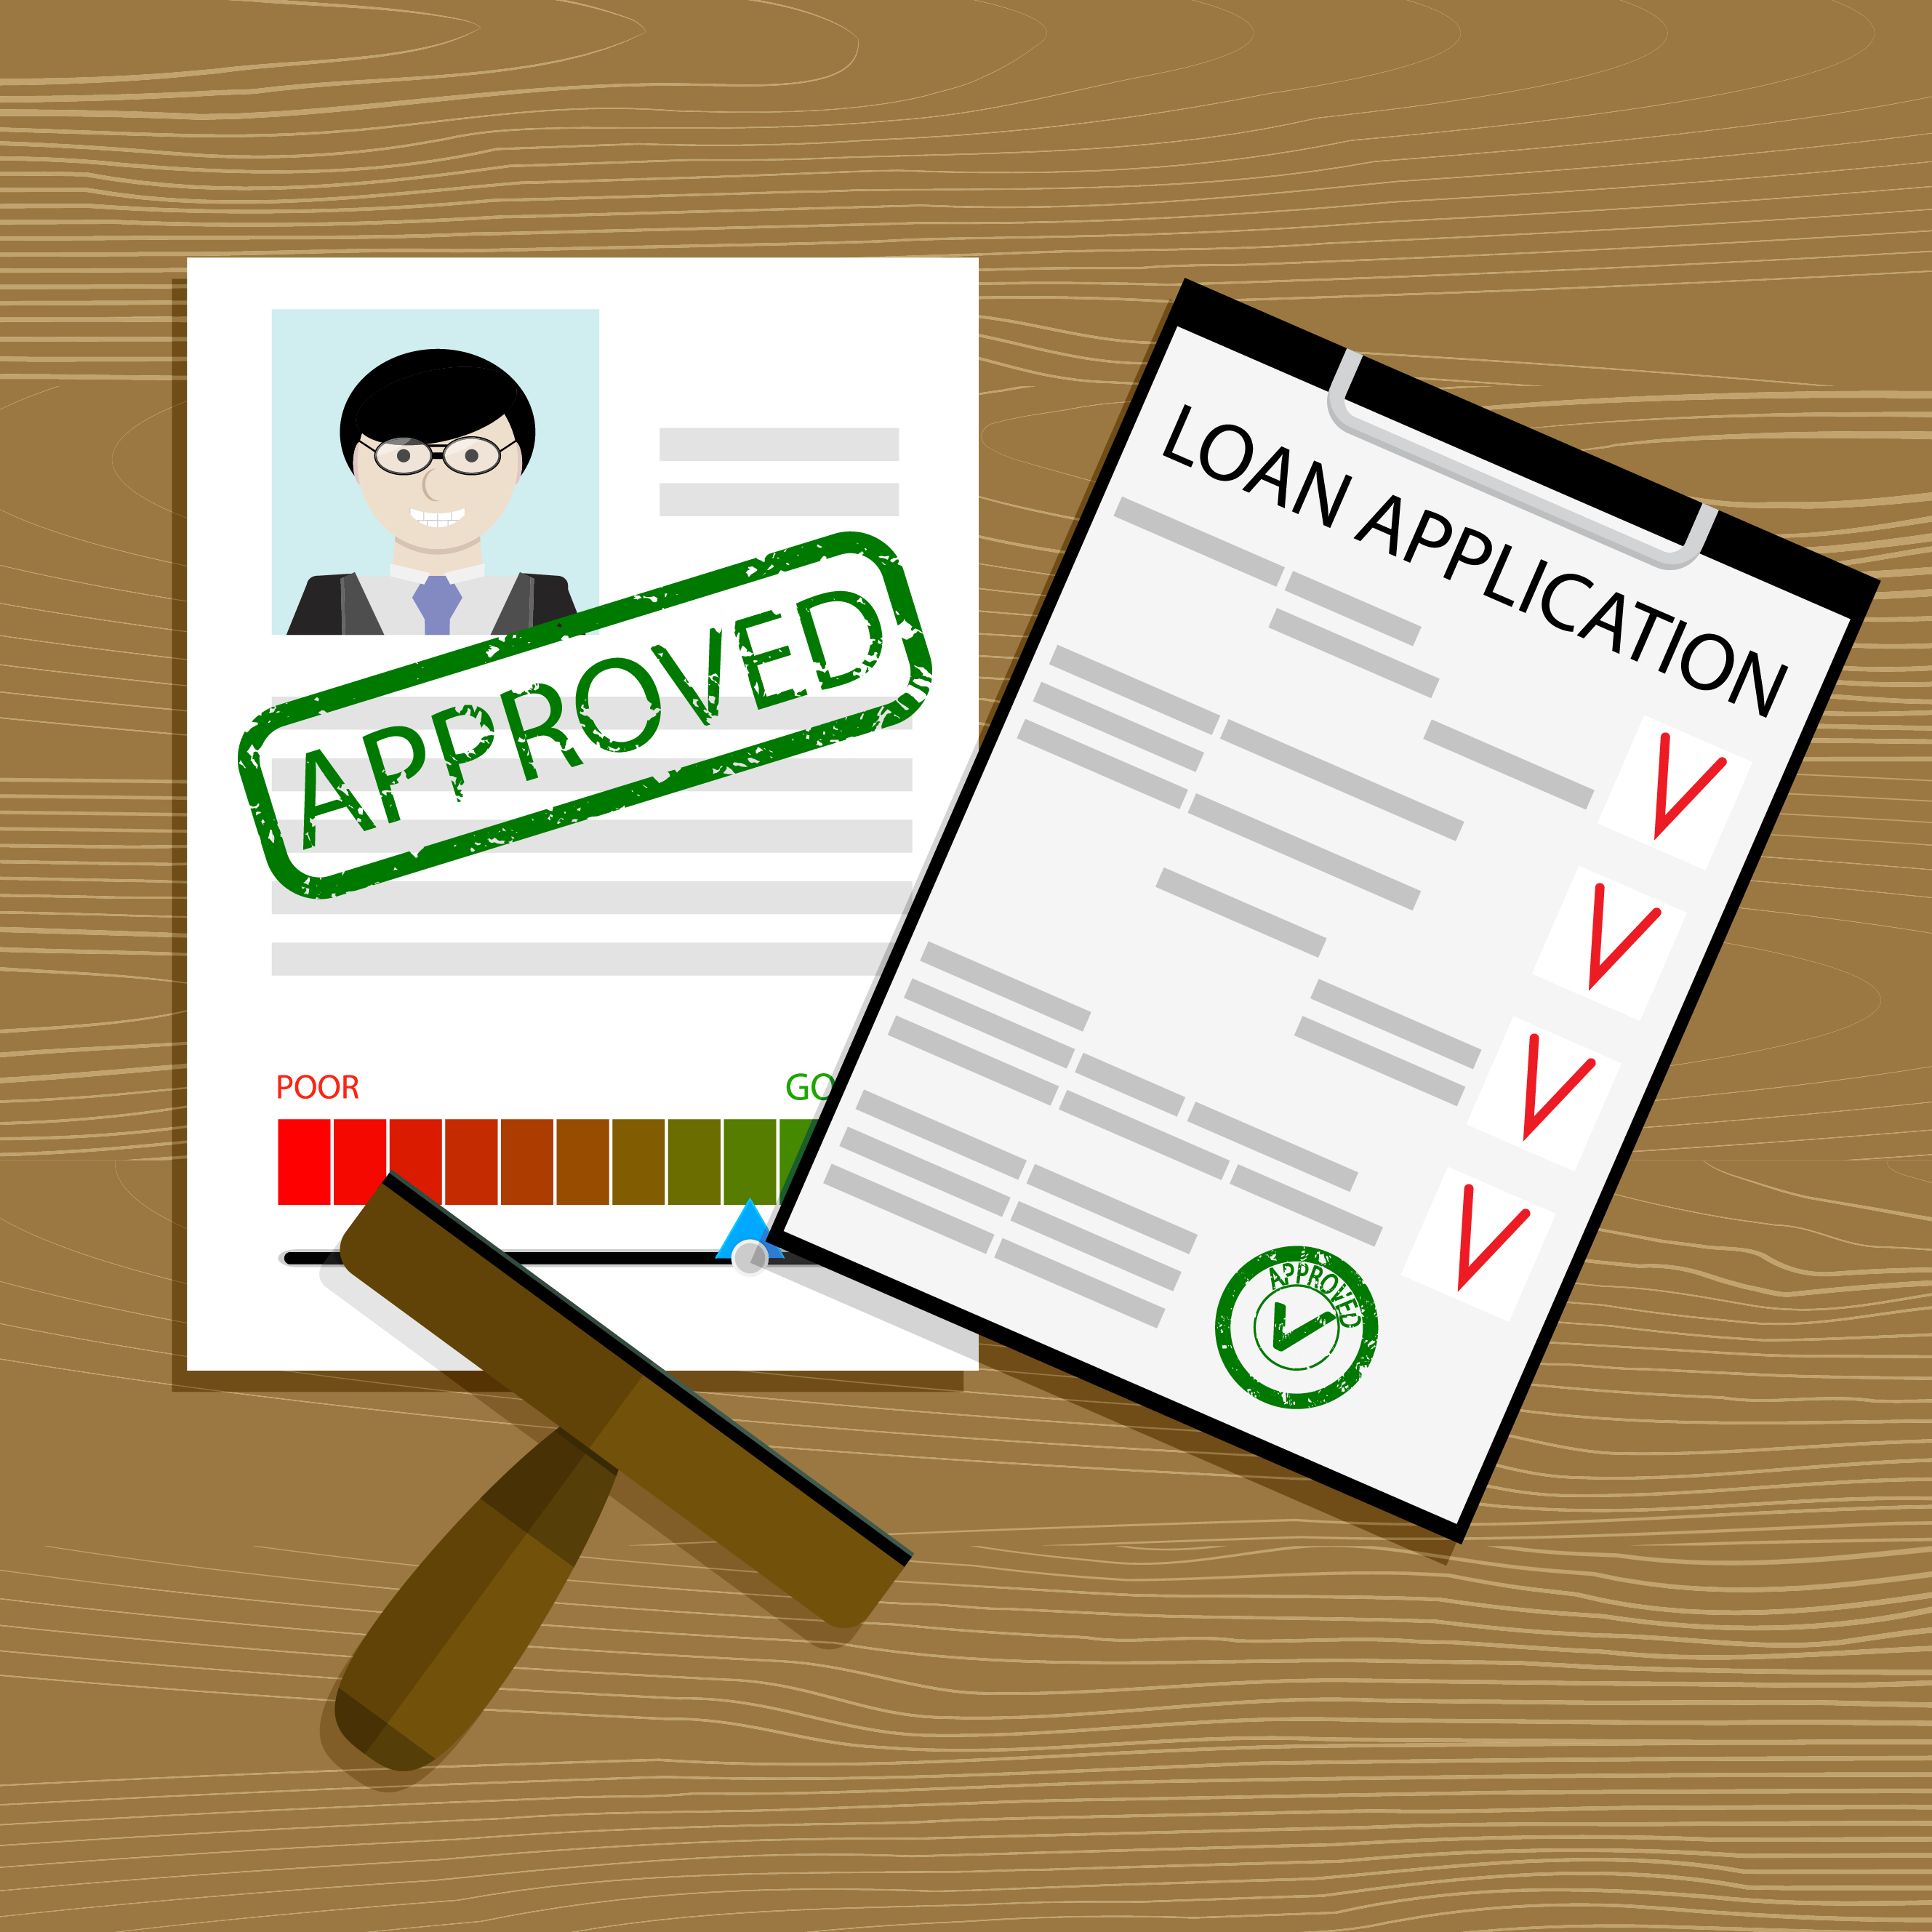 How long does it take to get a personal loan?